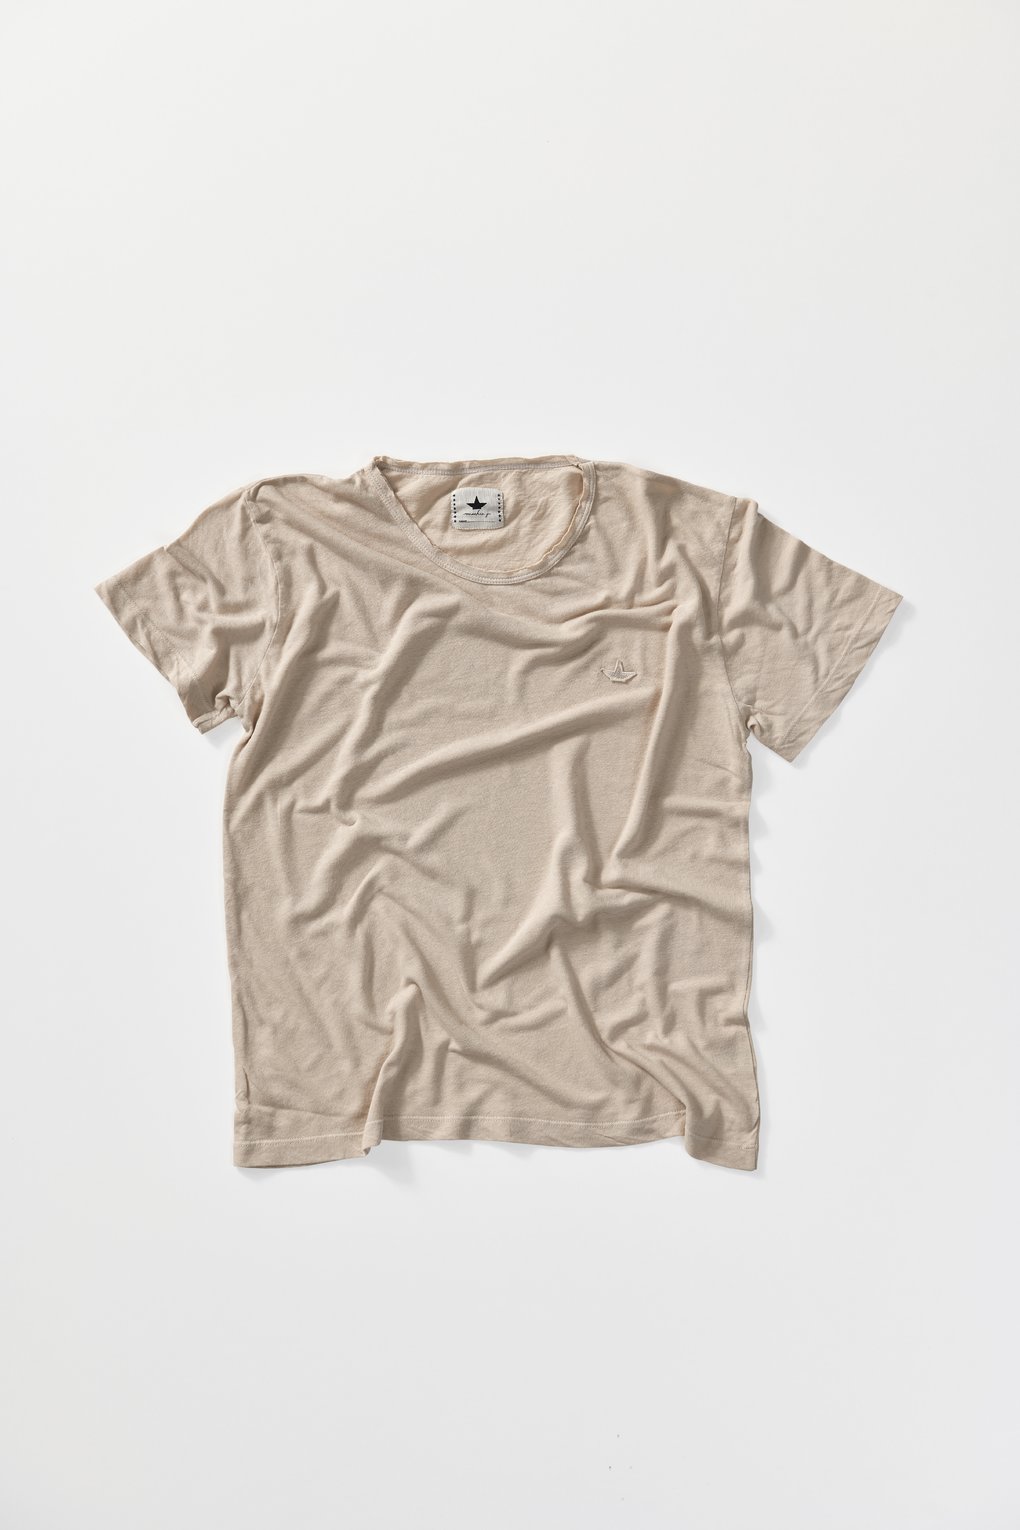 T-shirt in jersey in linen cotton blend - Cord